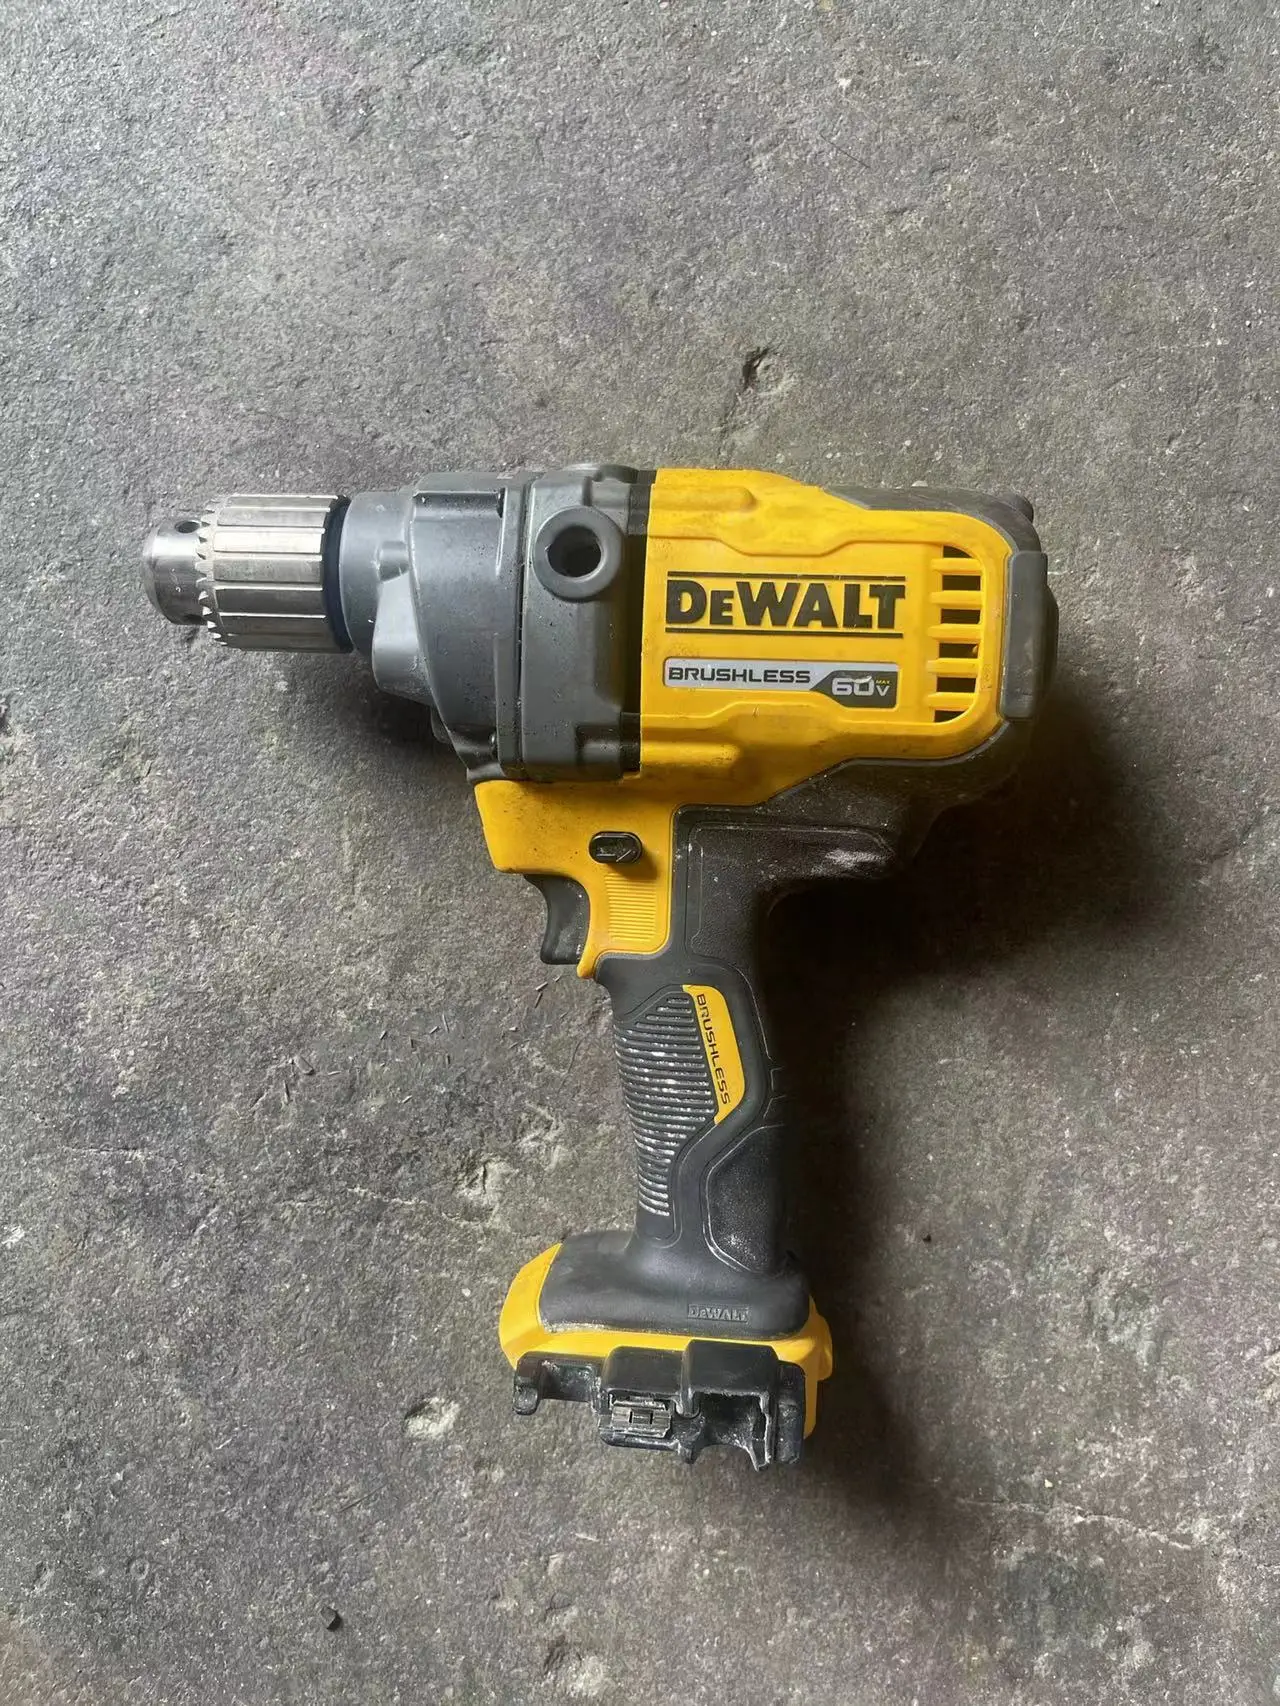 

DEWALT DCD130 60V Cordless Brushless 1/2" Mixer/Drill (Tool Only).USED. SECOND HAND